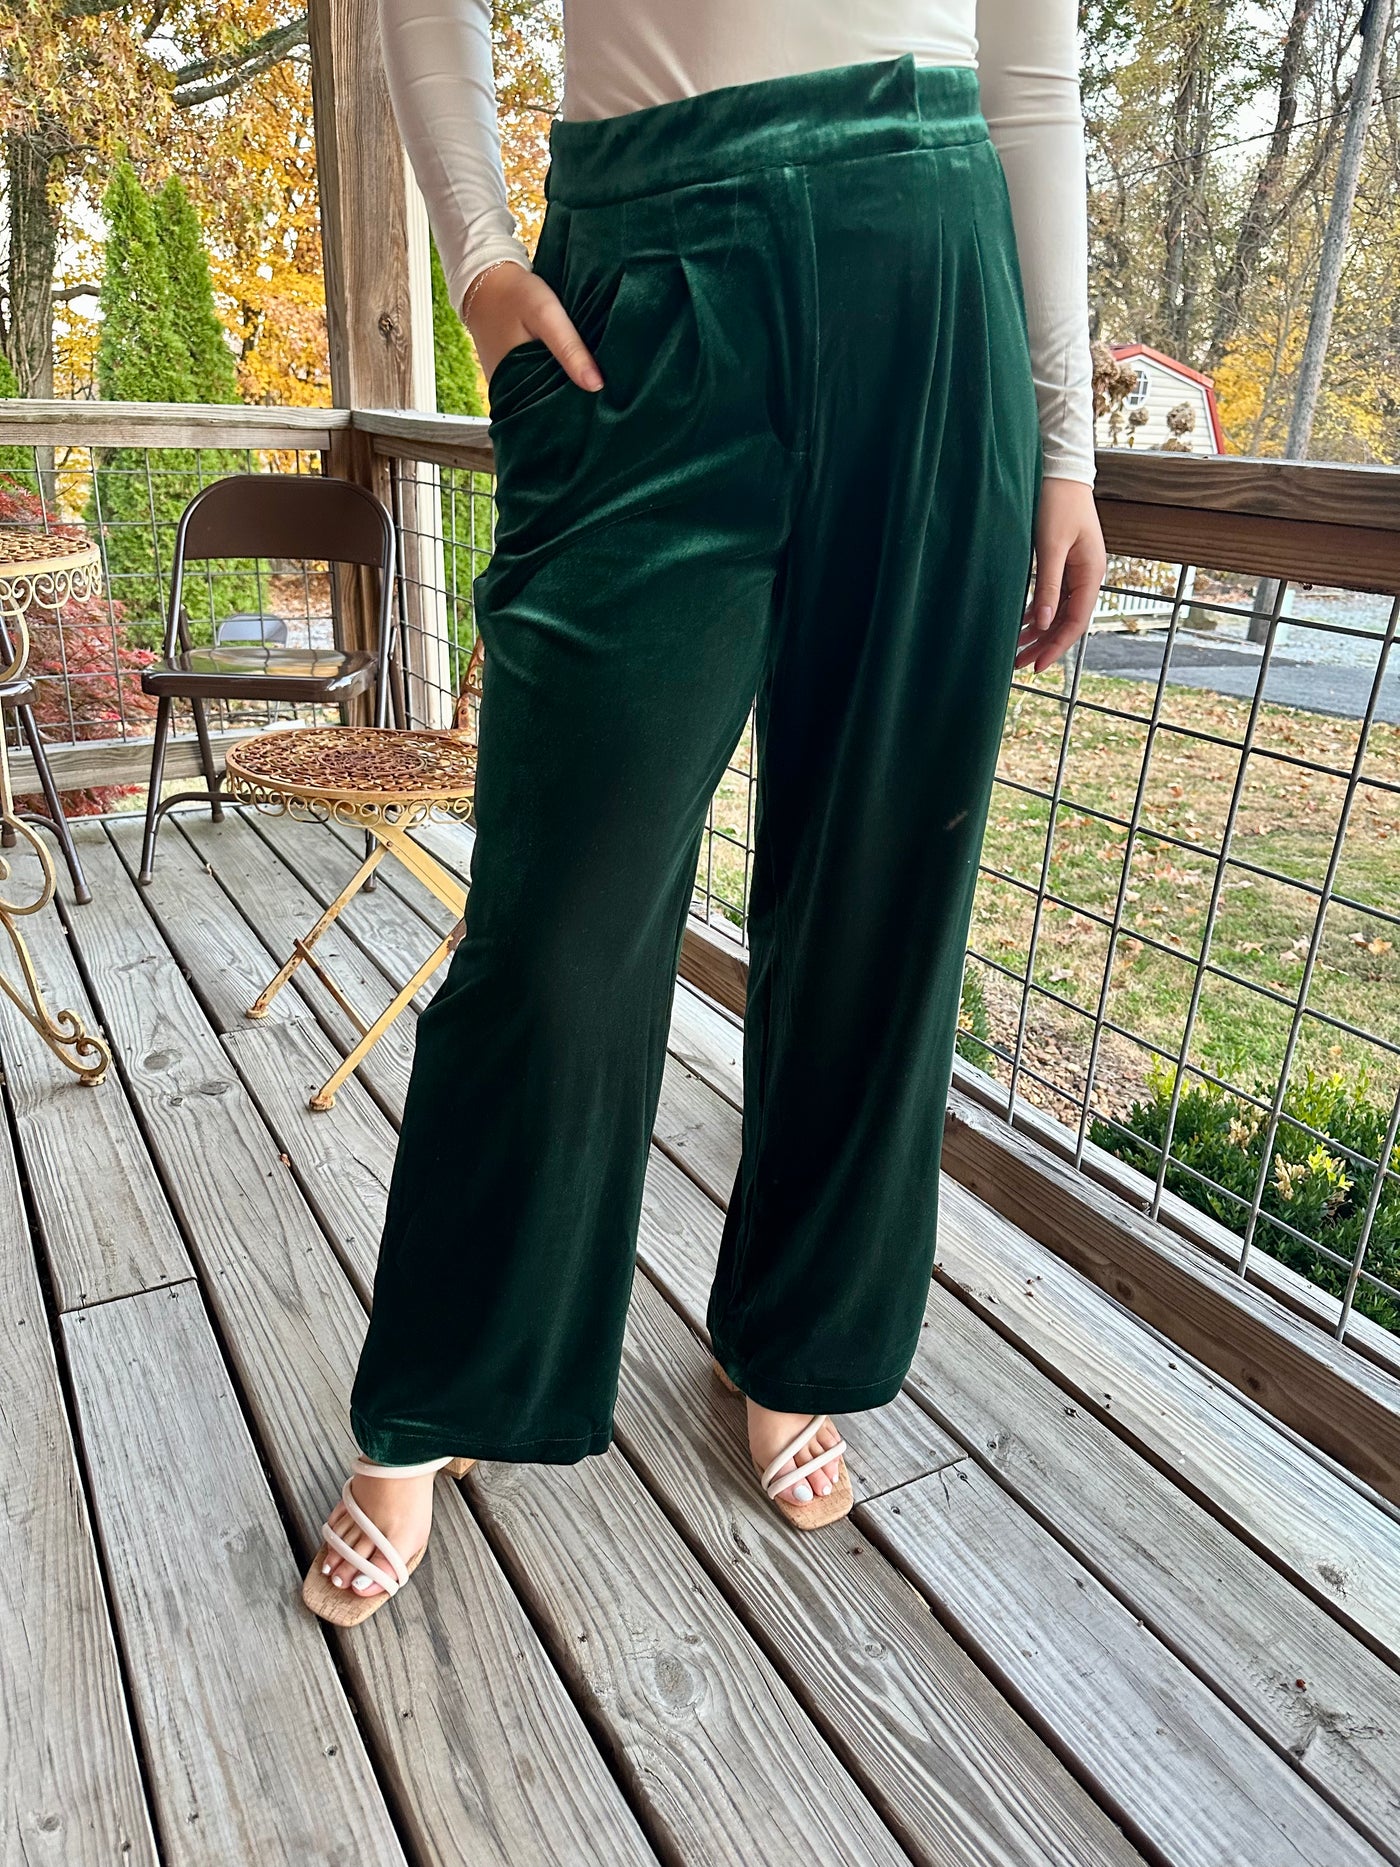 Forest Green High Waist Velvet Holiday Party Marine Straight Pants Final Sale